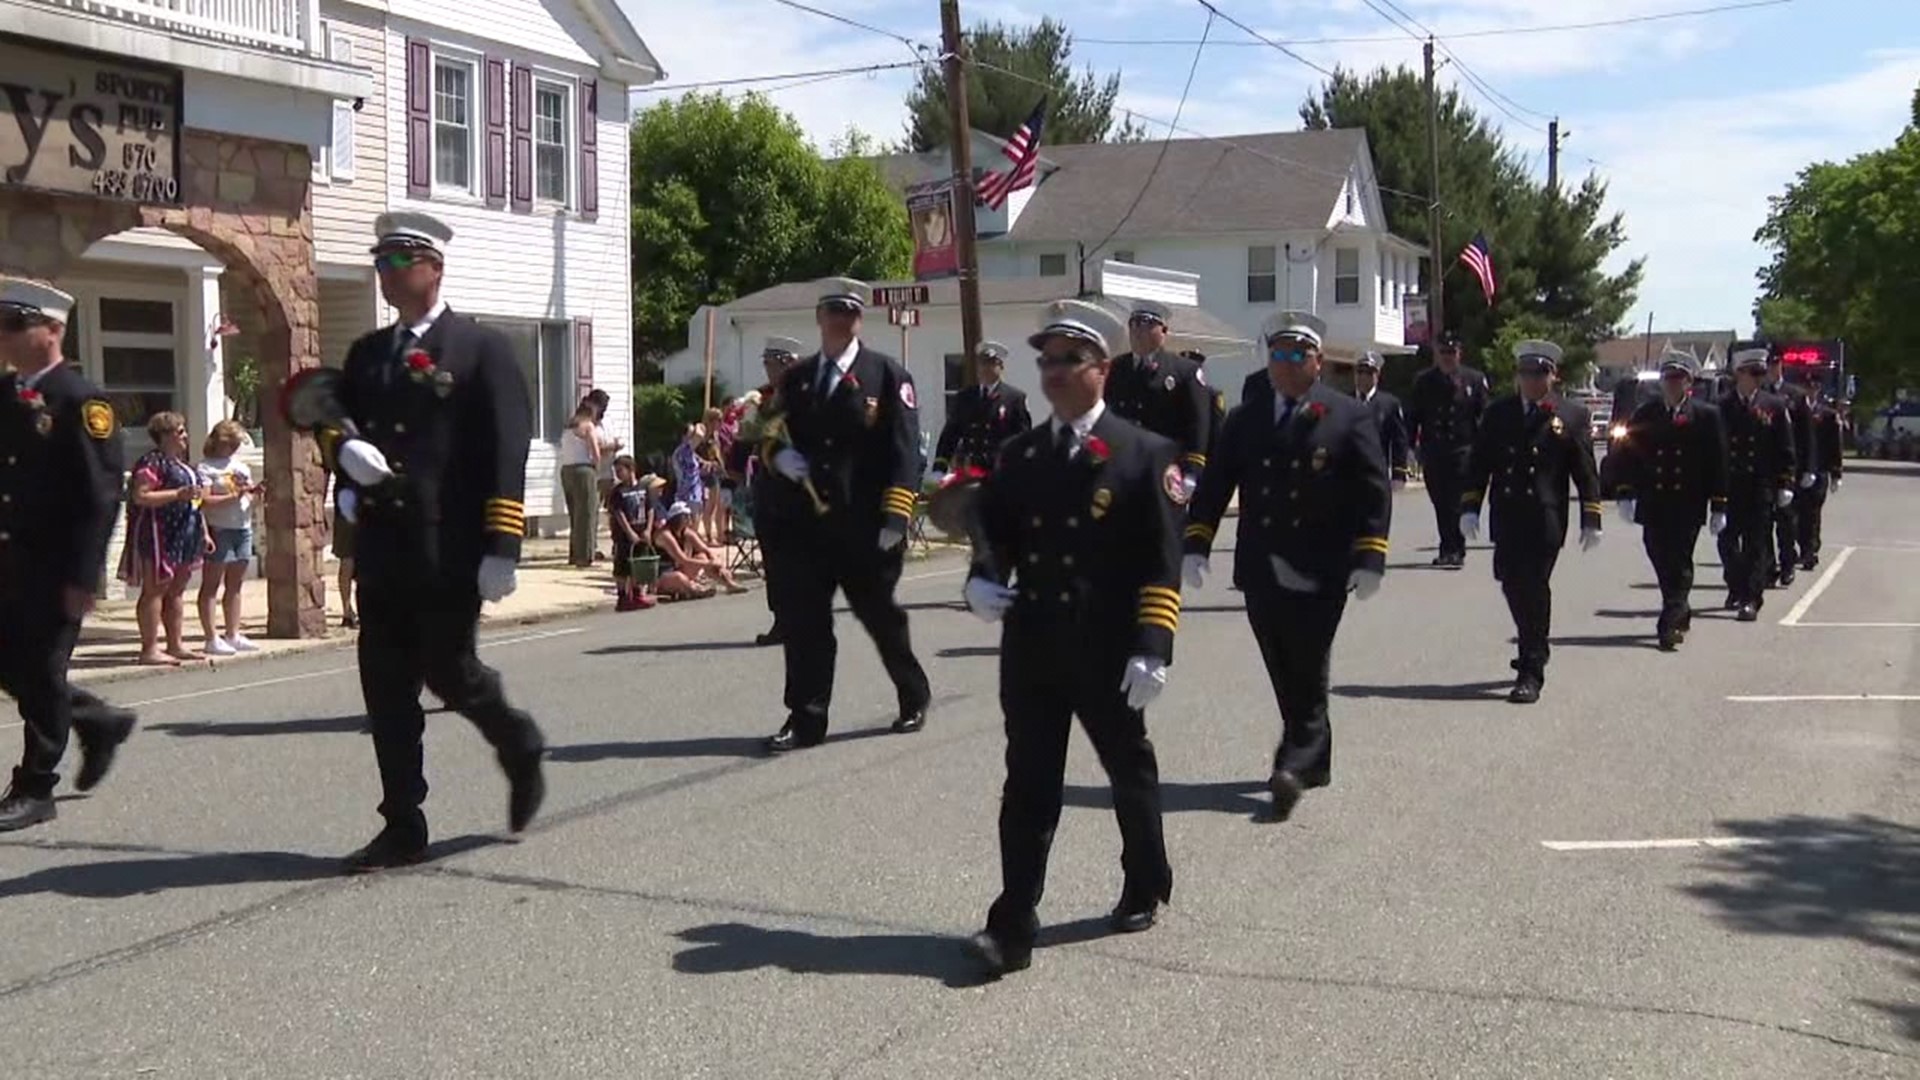 The parade and service are a long-standing tradition in the county, spanning more than 75 years.